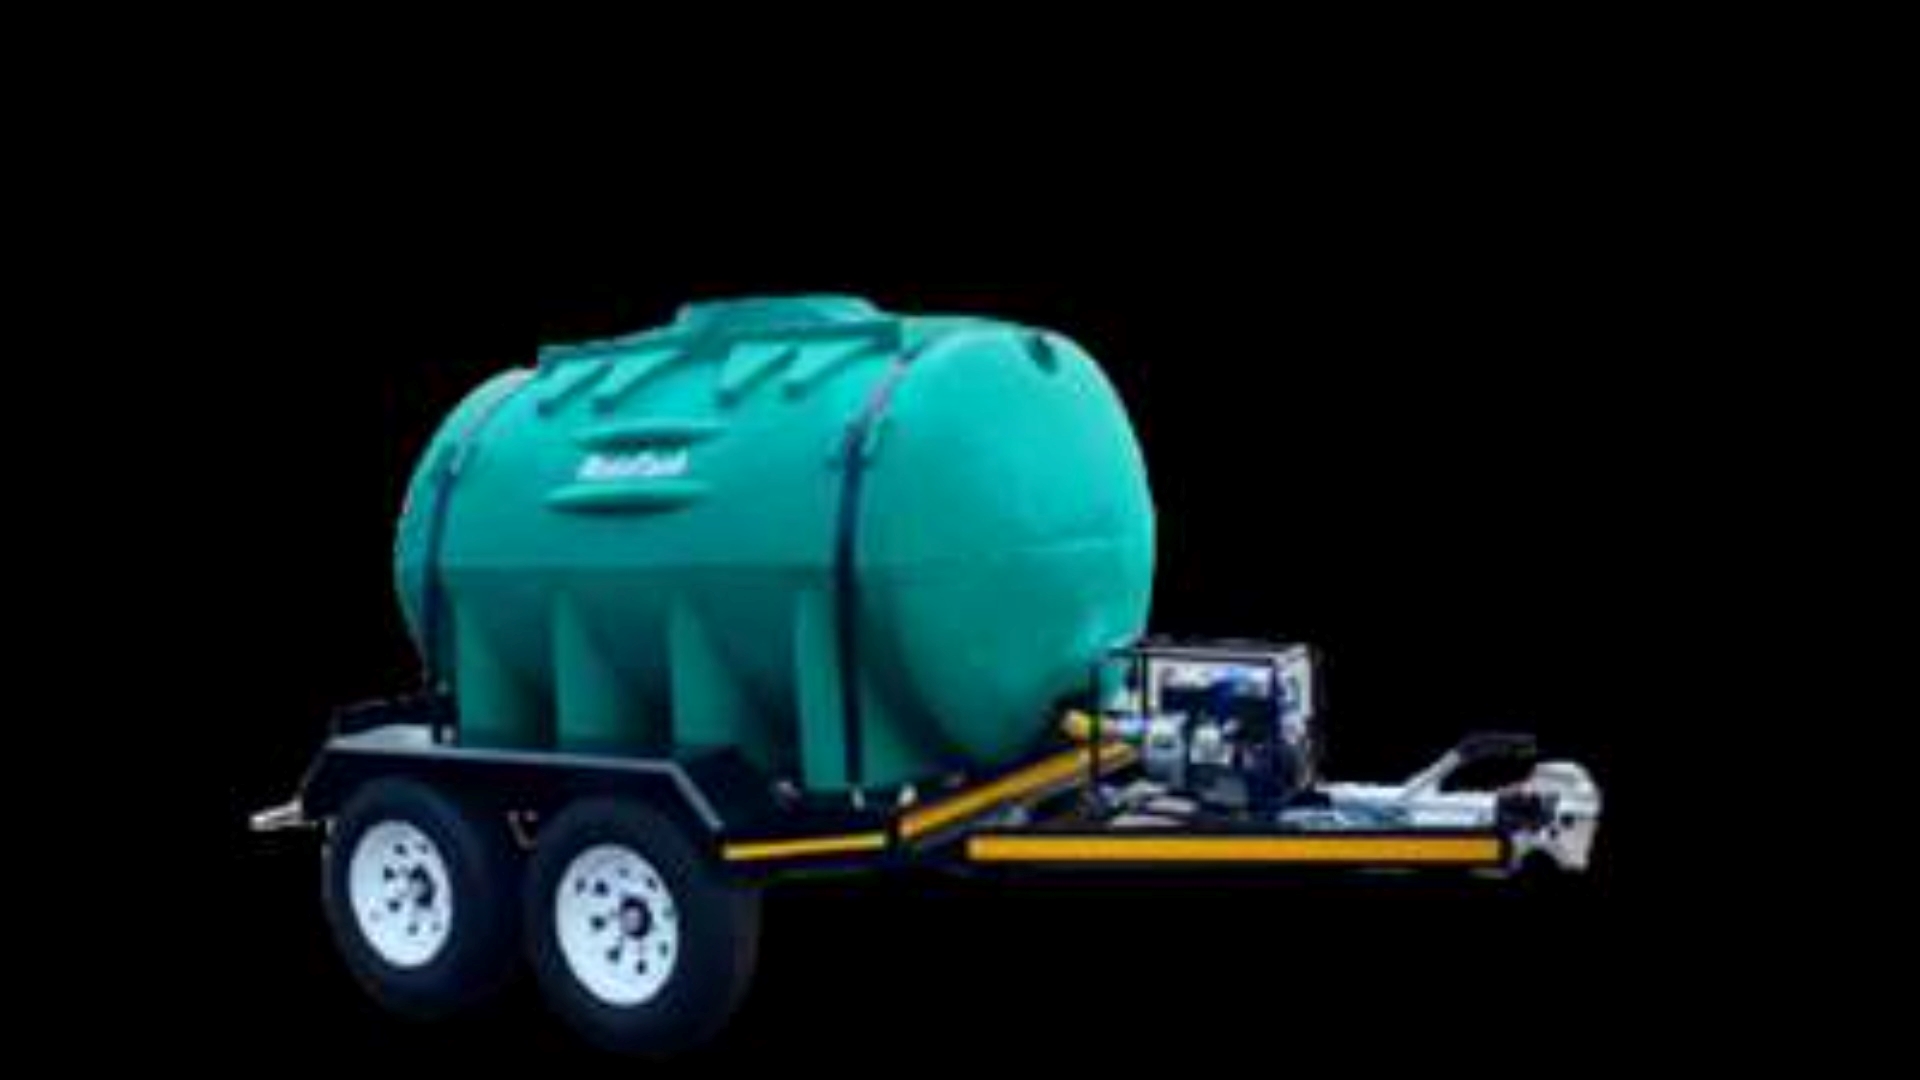 Custom Diesel bowser trailer 2500 LITRE PLASTIC DIESEL/ PARAFFINBOWSER  10 2022 for sale by Jikelele Tankers and Trailers   | Truck & Trailer Marketplaces